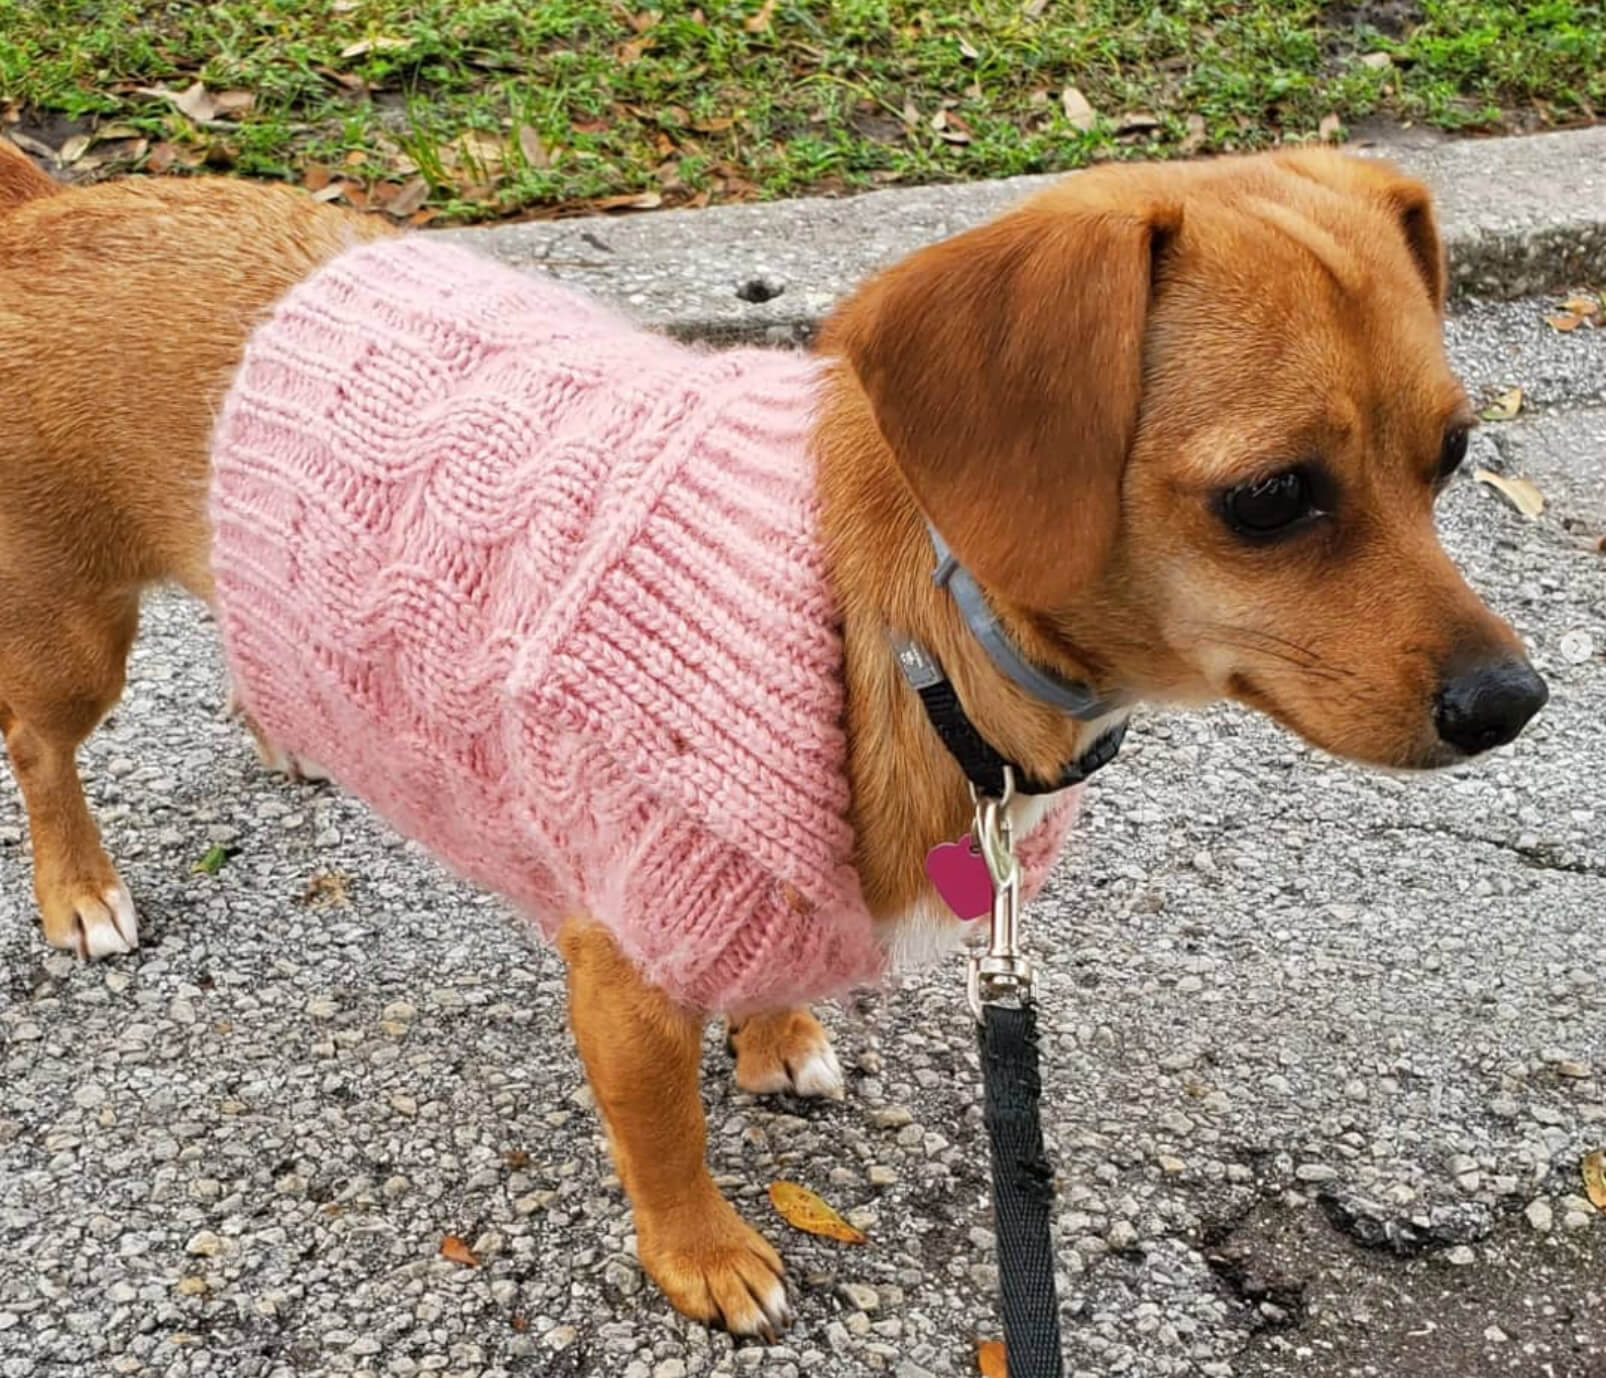 Sarah's dog Ginger dressed in a sweater